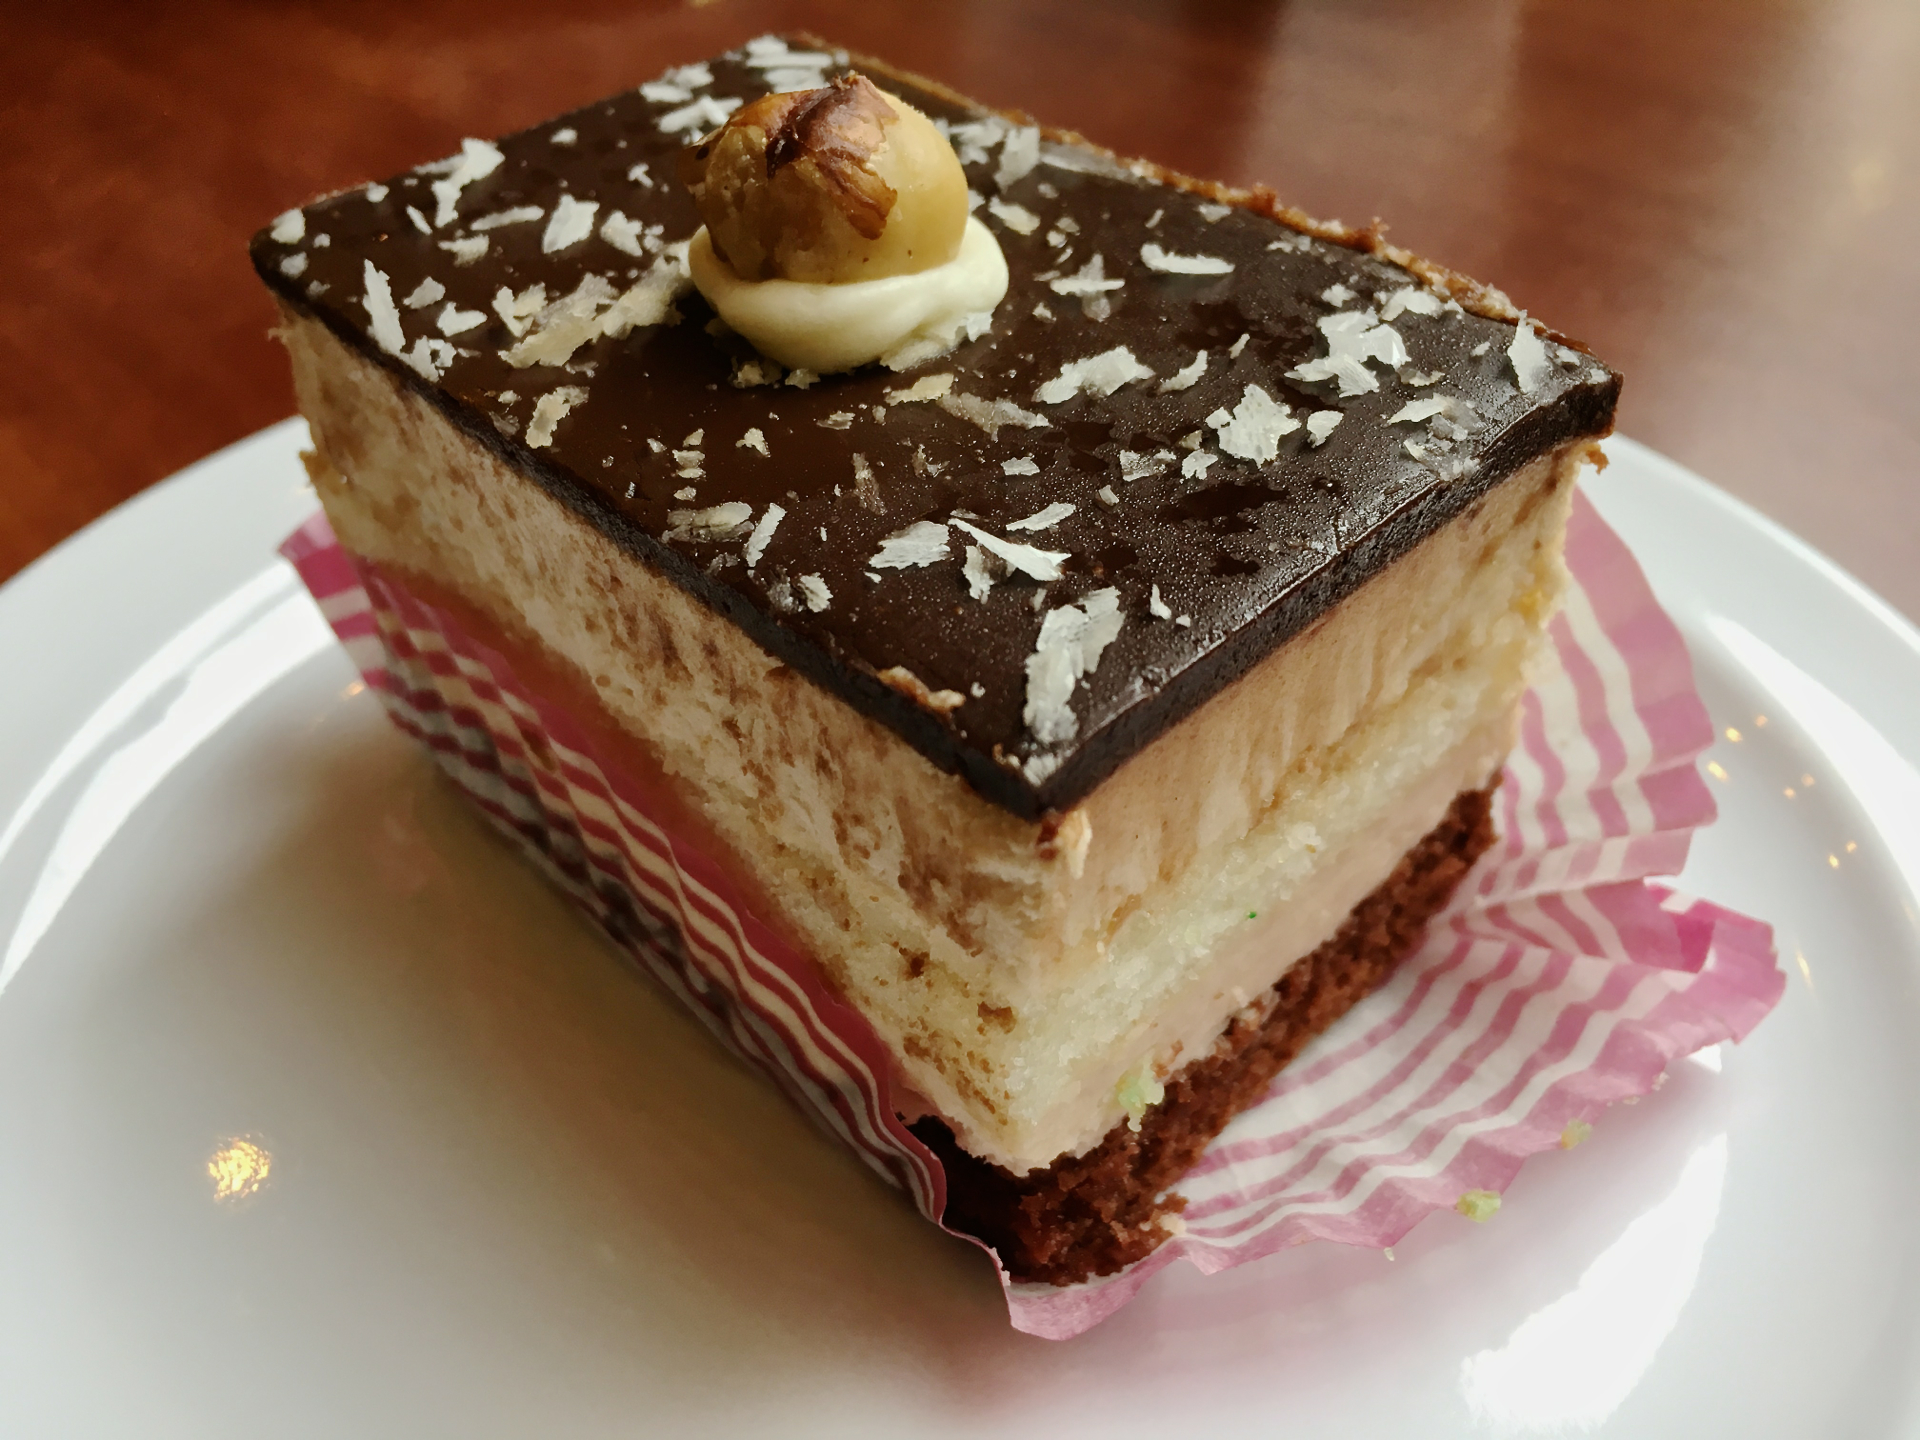 A chocolate and hazelnut mousse pastry at Bijan Bakery & Cafe.